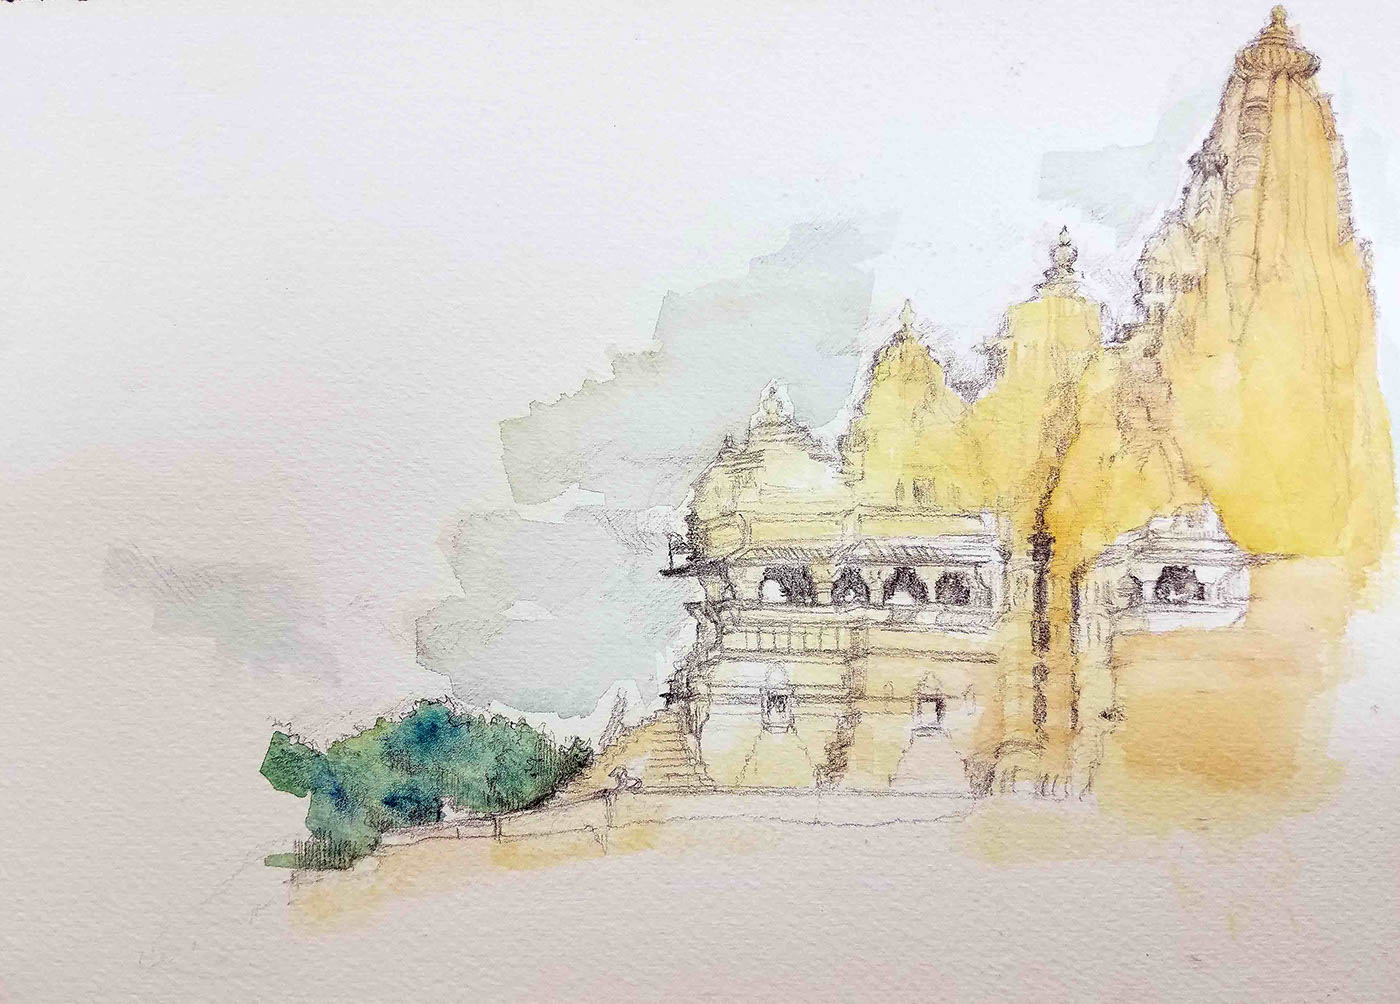 India Landscape Drawing  fine art environment Environmental drawing TRADITIONAL ART temples religion